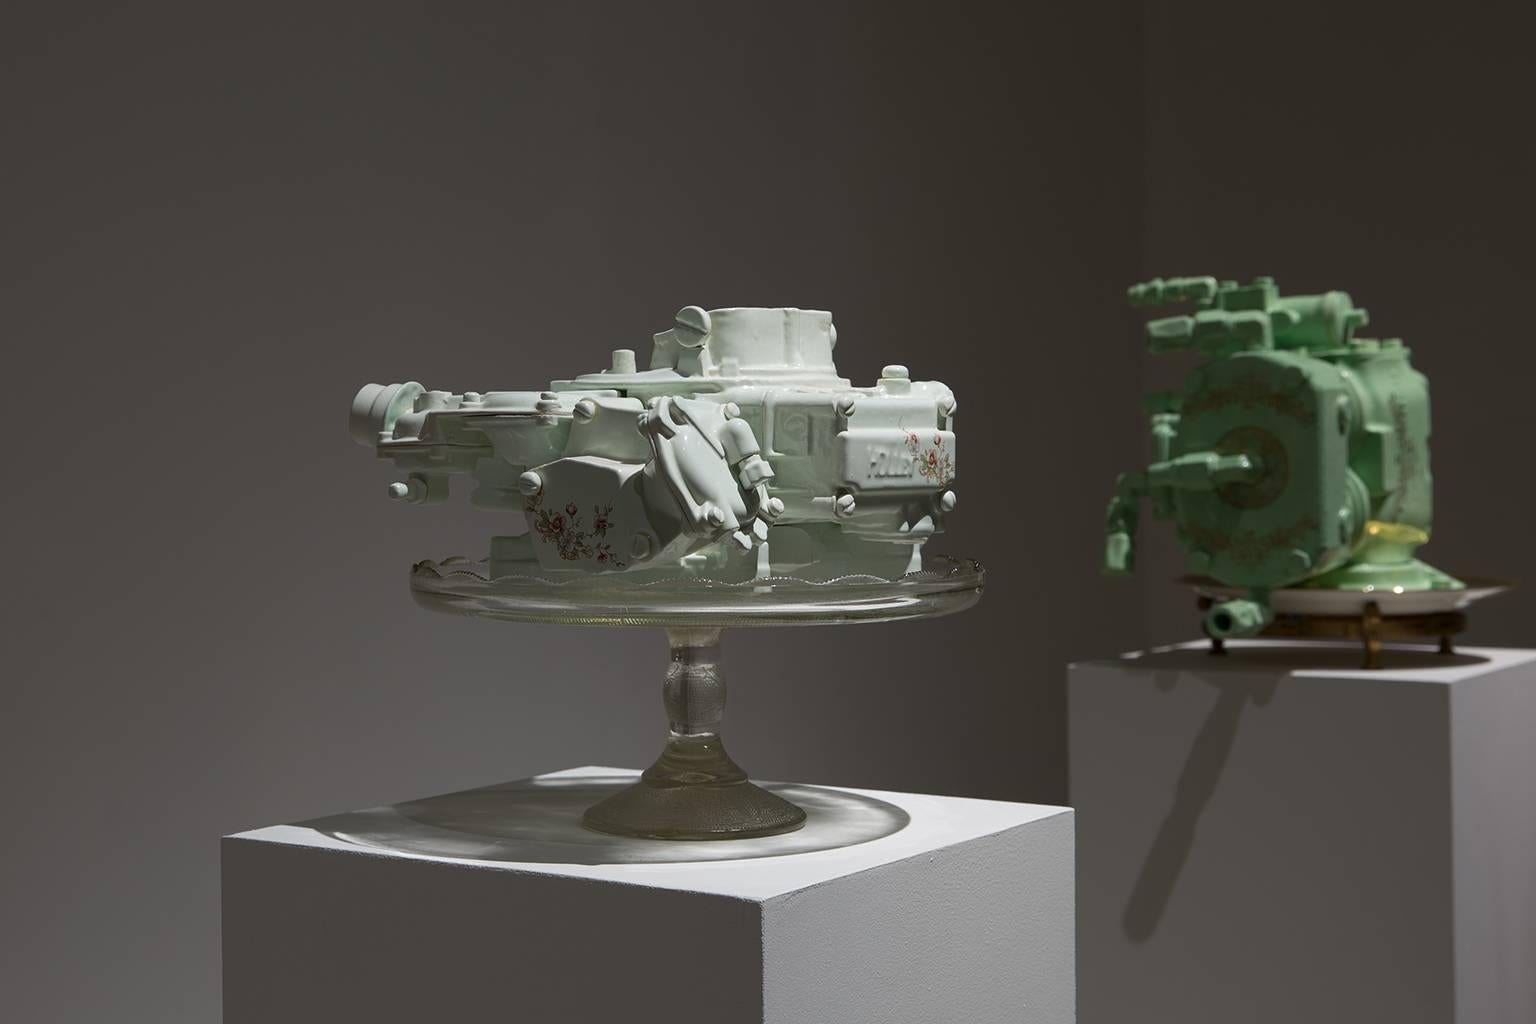 Holly Carburettor - Contemporary Sculpture by Clint Neufeld